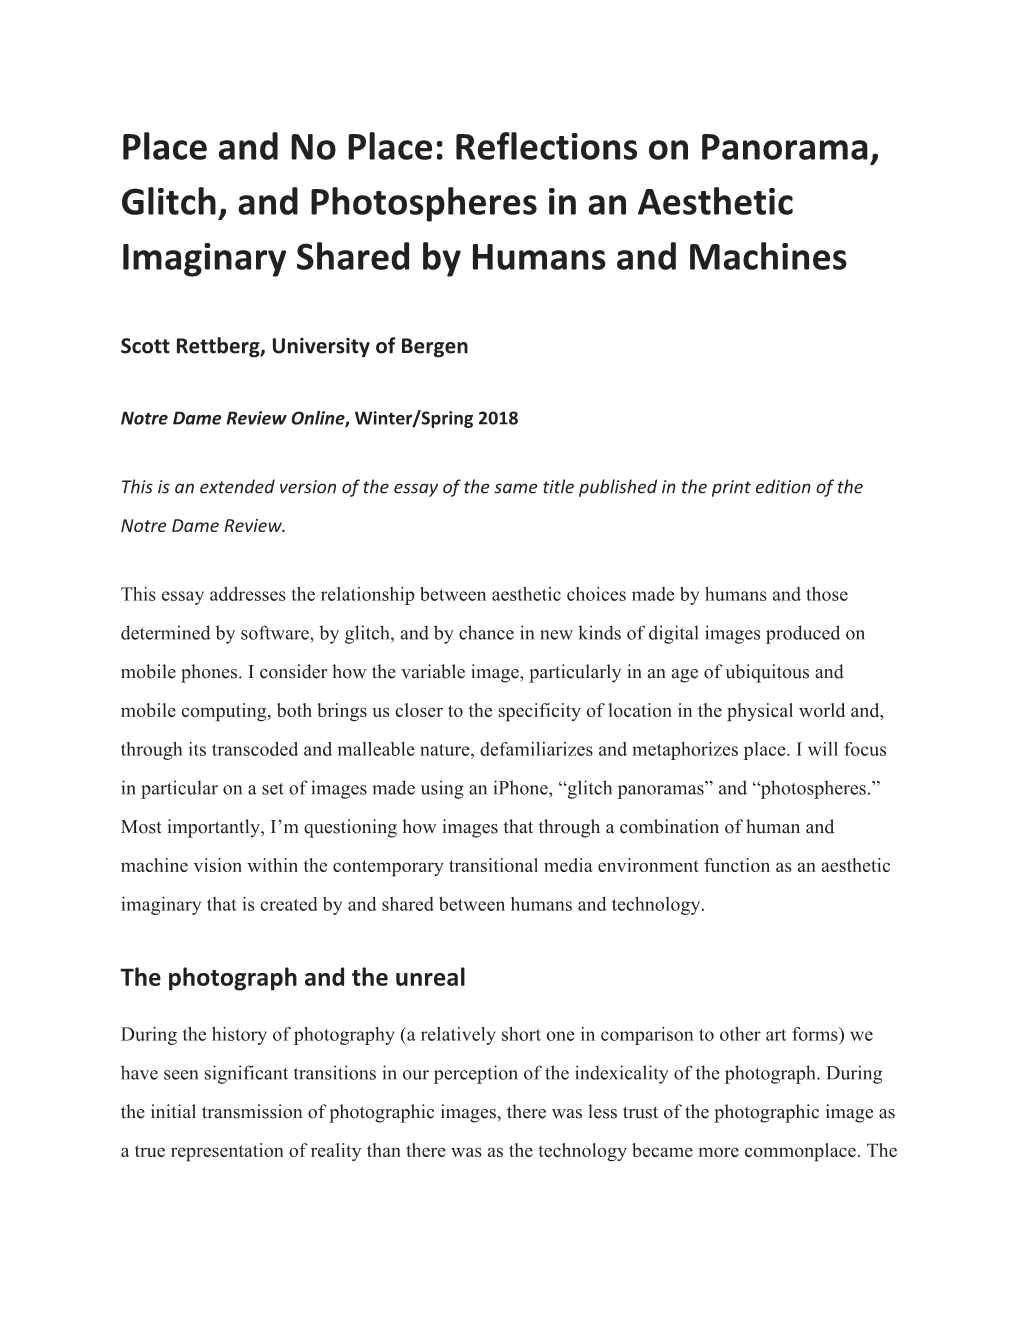 Reflections on Panorama, Glitch, and Photospheres in an Aesthetic Imaginary Shared by Humans and Machines